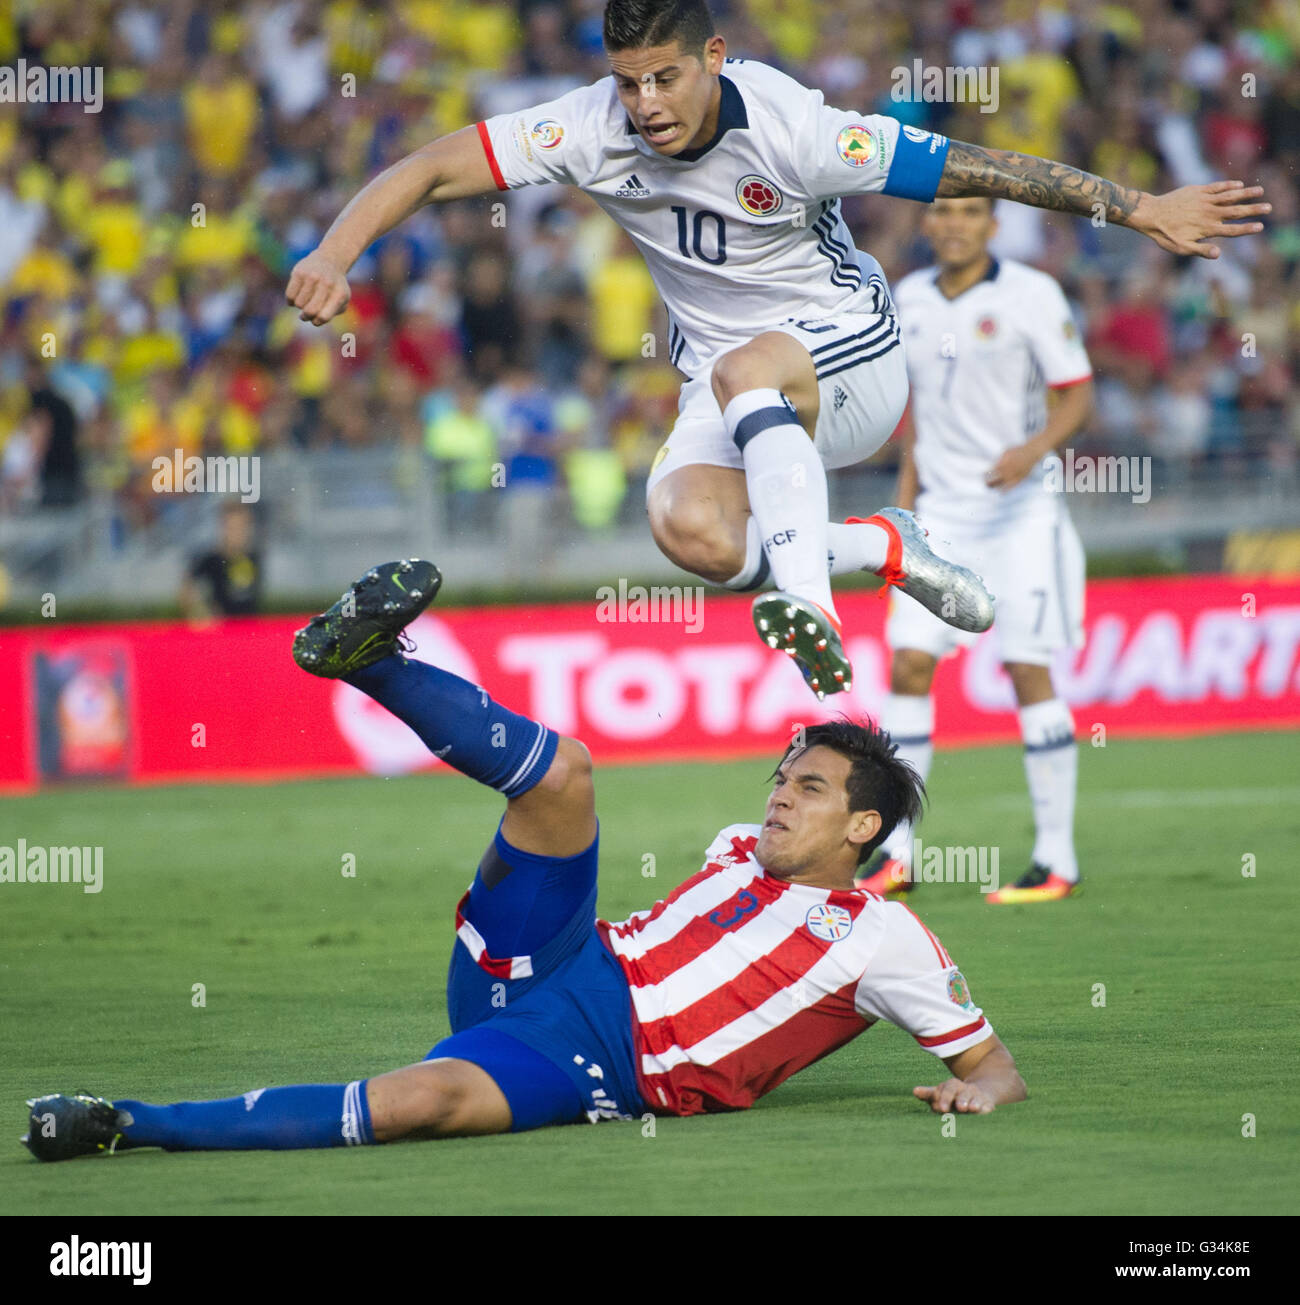 Pasadena, USA. 7th June, 2016. Colombia's James Rodriguez (Top) jumps over Paraguay's Gustavo Raul Gomez during the Copa America Centenario Group A match at Rose Bowl Stadium in Pasadena, California, the United States, June 7, 2016. © Yang Lei/Xinhua/Alamy Live News Stock Photo